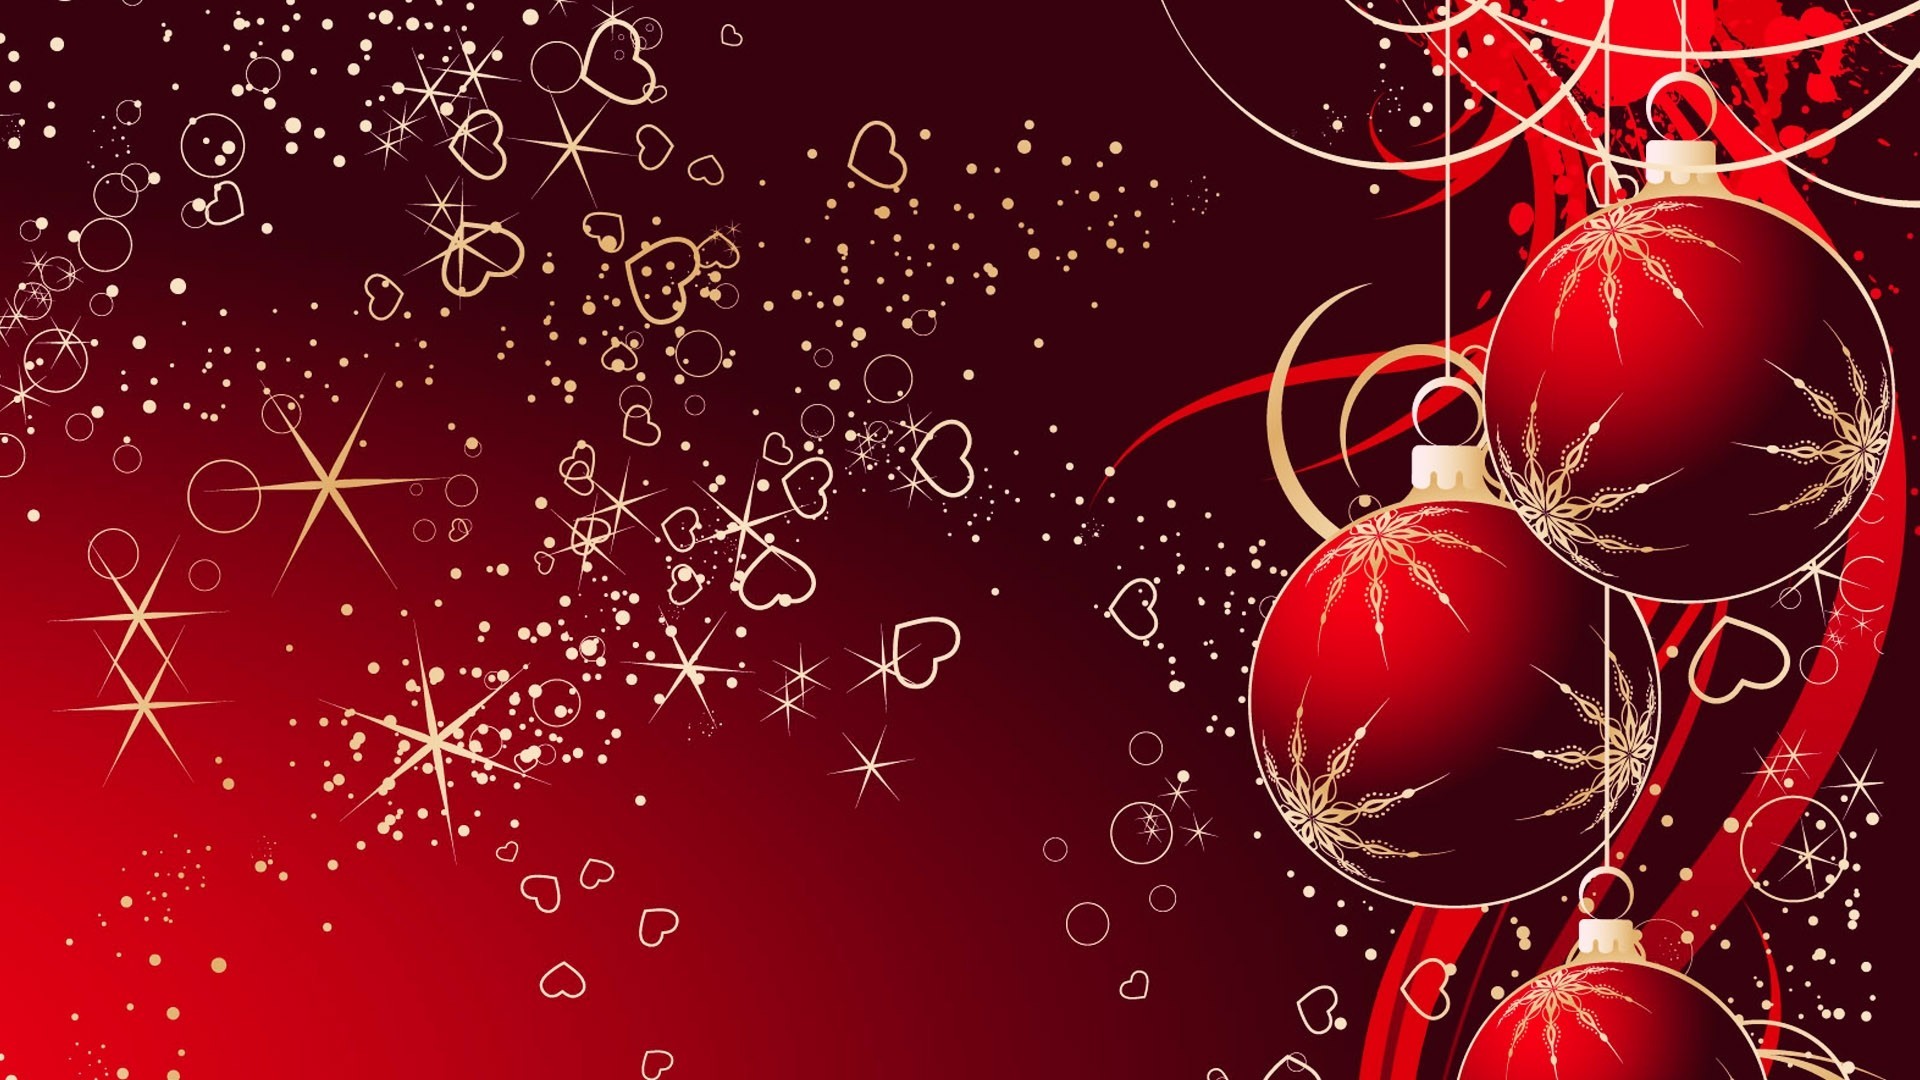 Christmas Wallpapers 1920x1080 - Wallpaper Cave